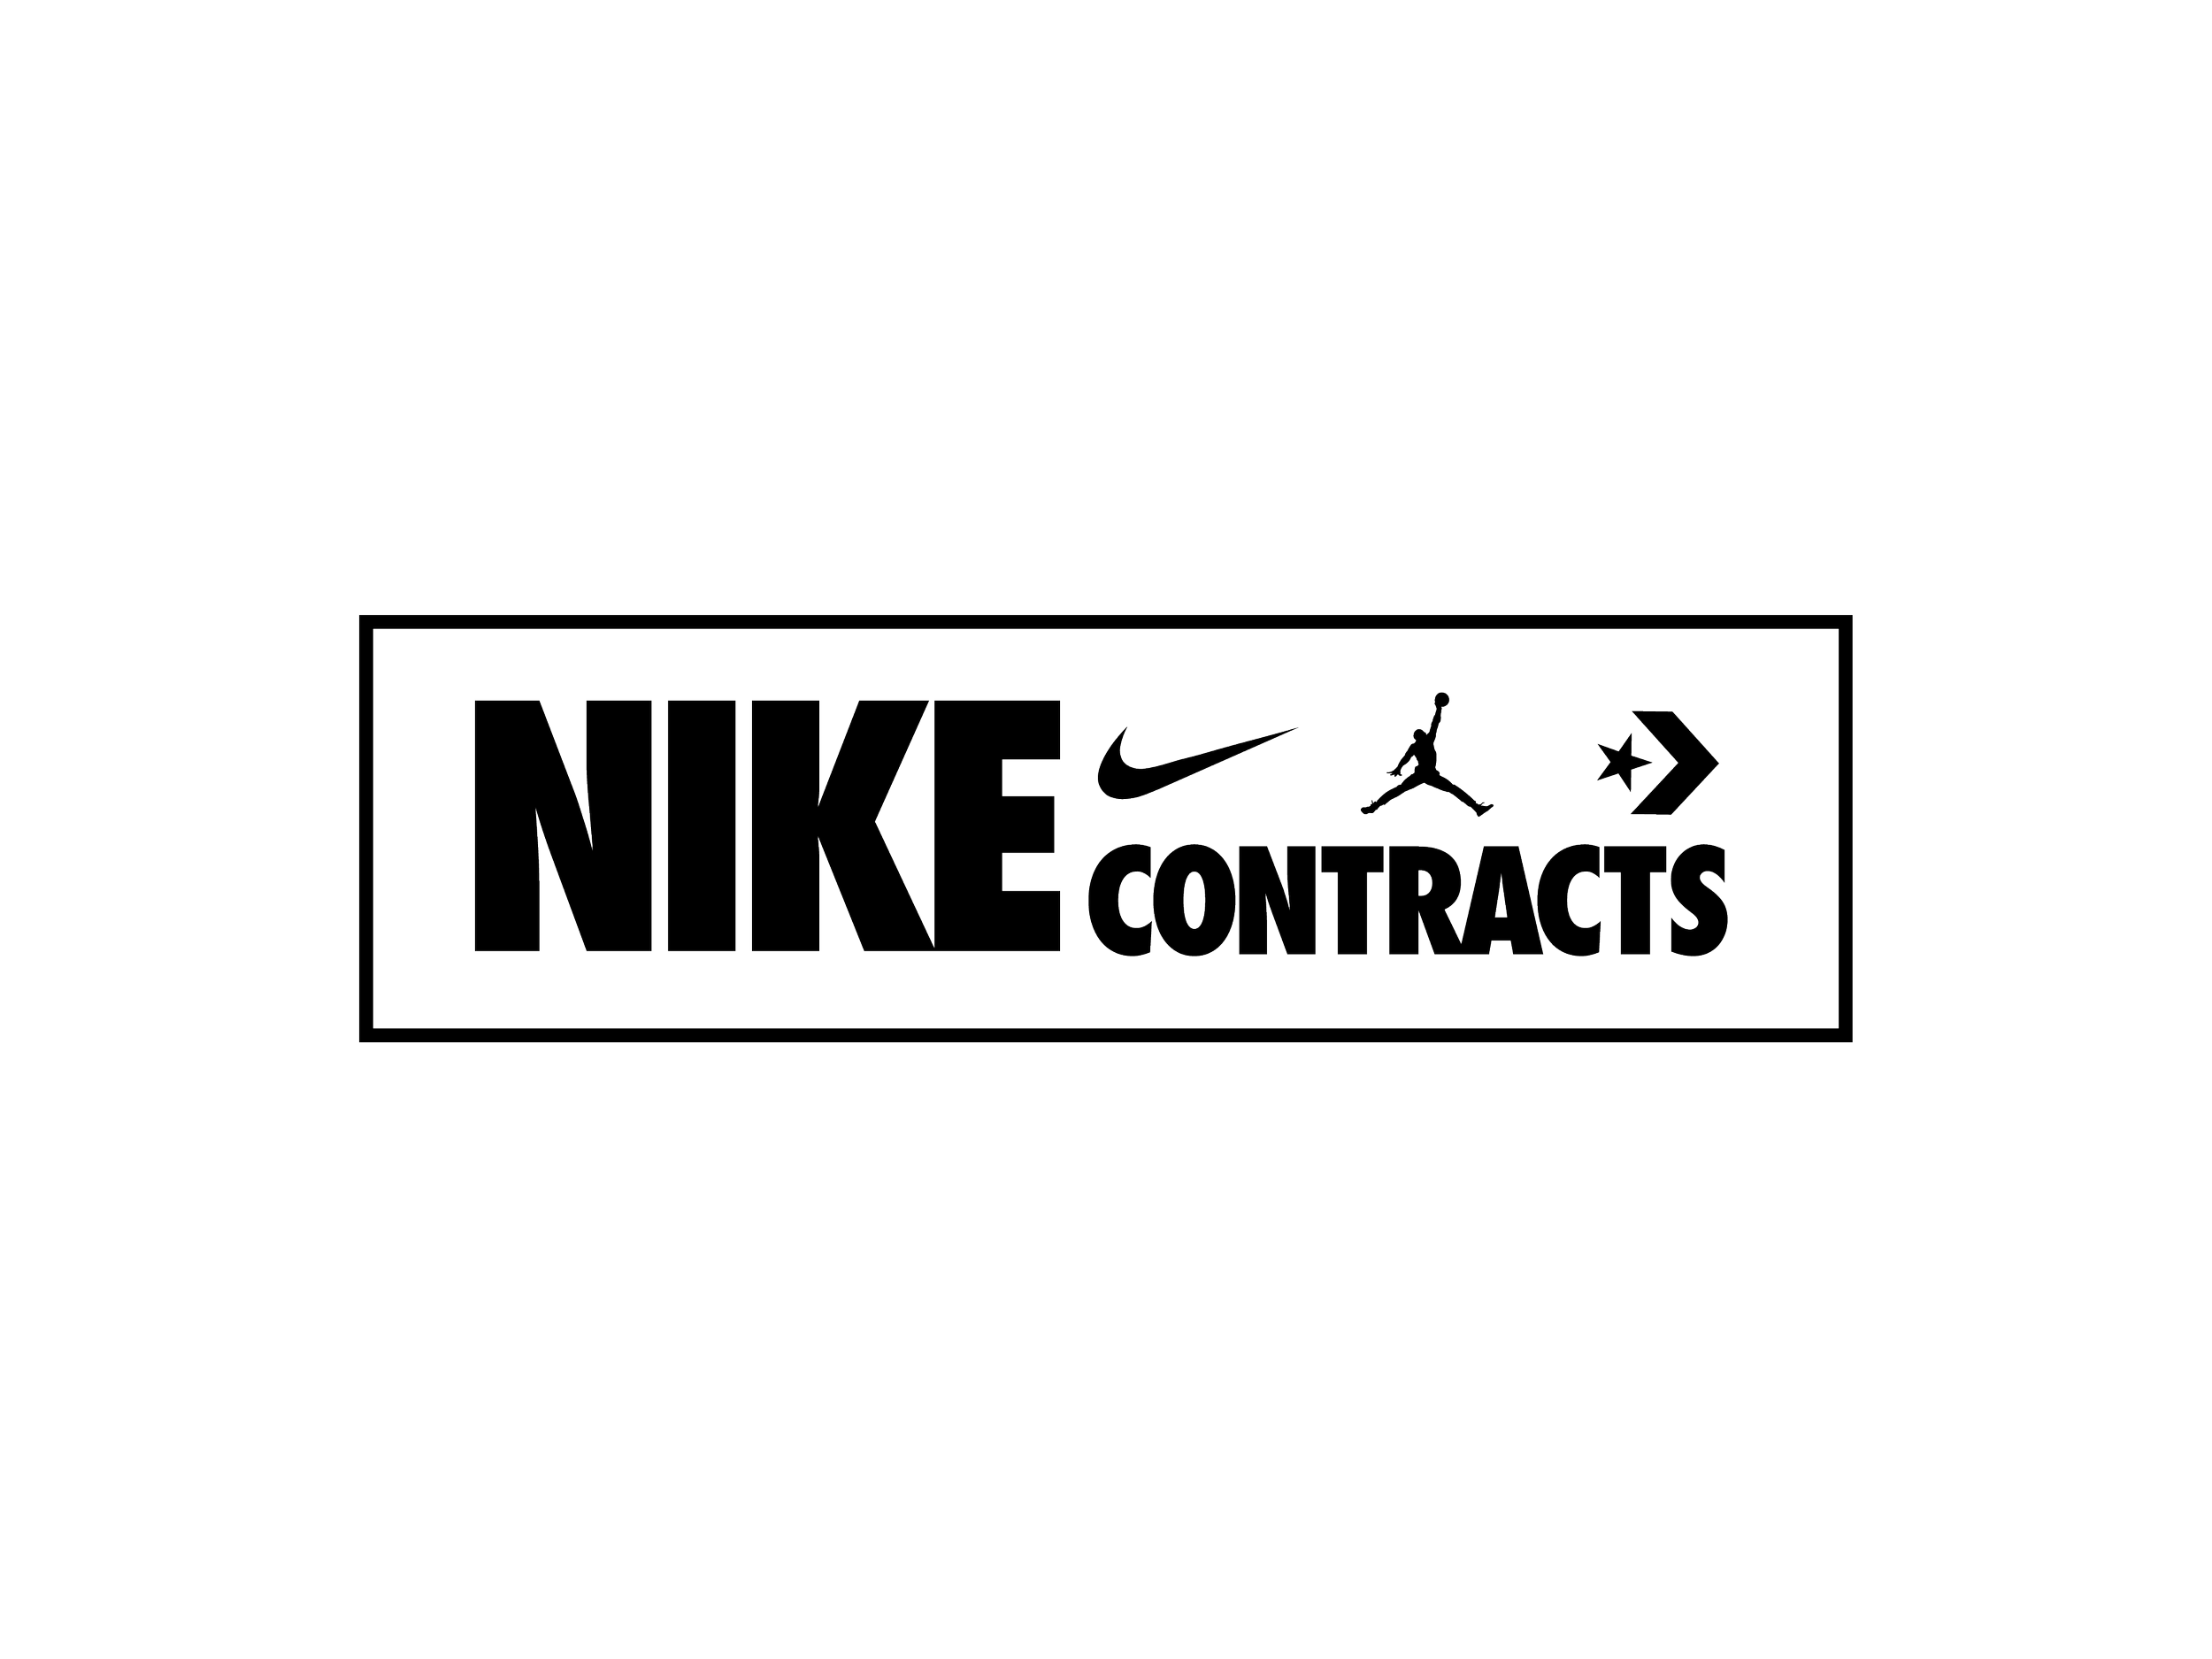 NIKEContracts_WordMark_r1-16.png